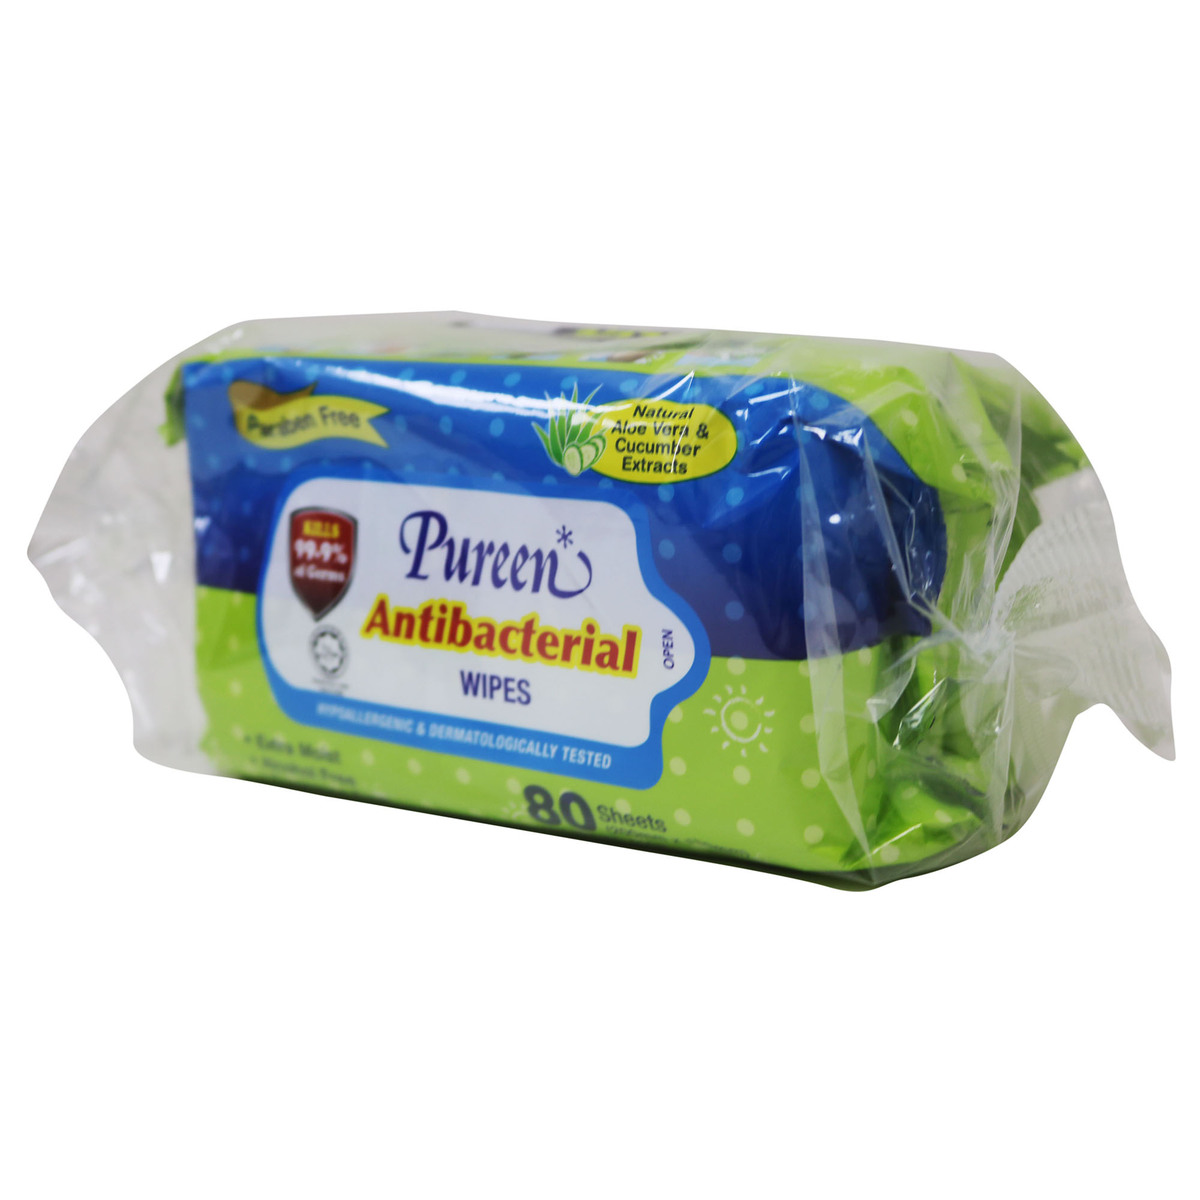 Pureen Antibacterial Wipes Fragrance Free 80sheets